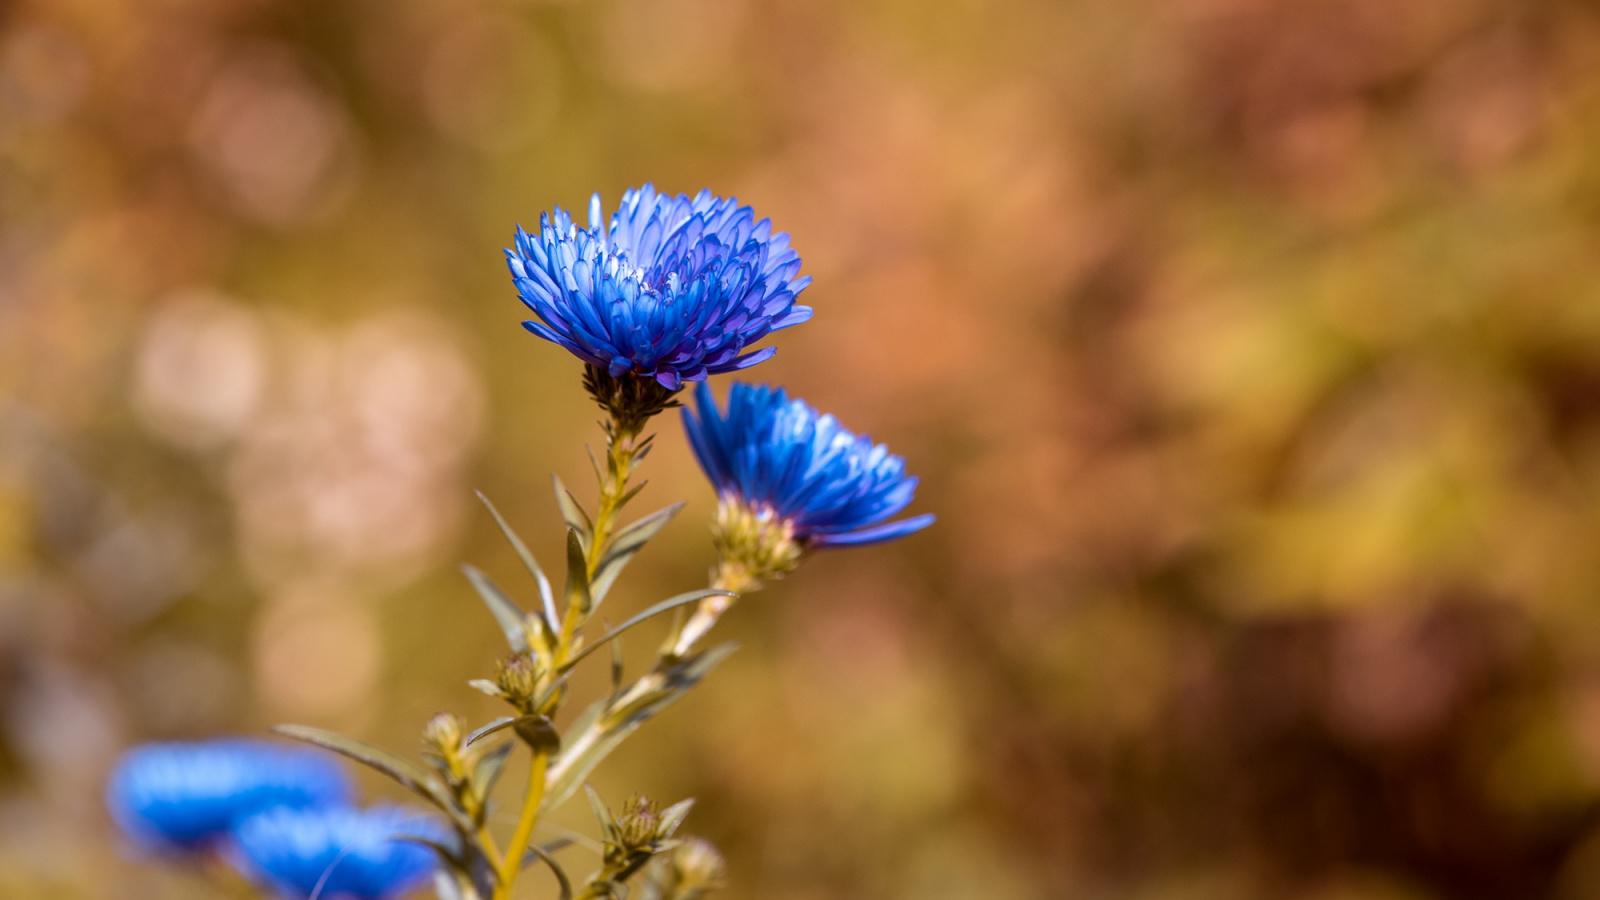 Download 1600x900 Wallpaper Blue Daisy Flowers, Close Up